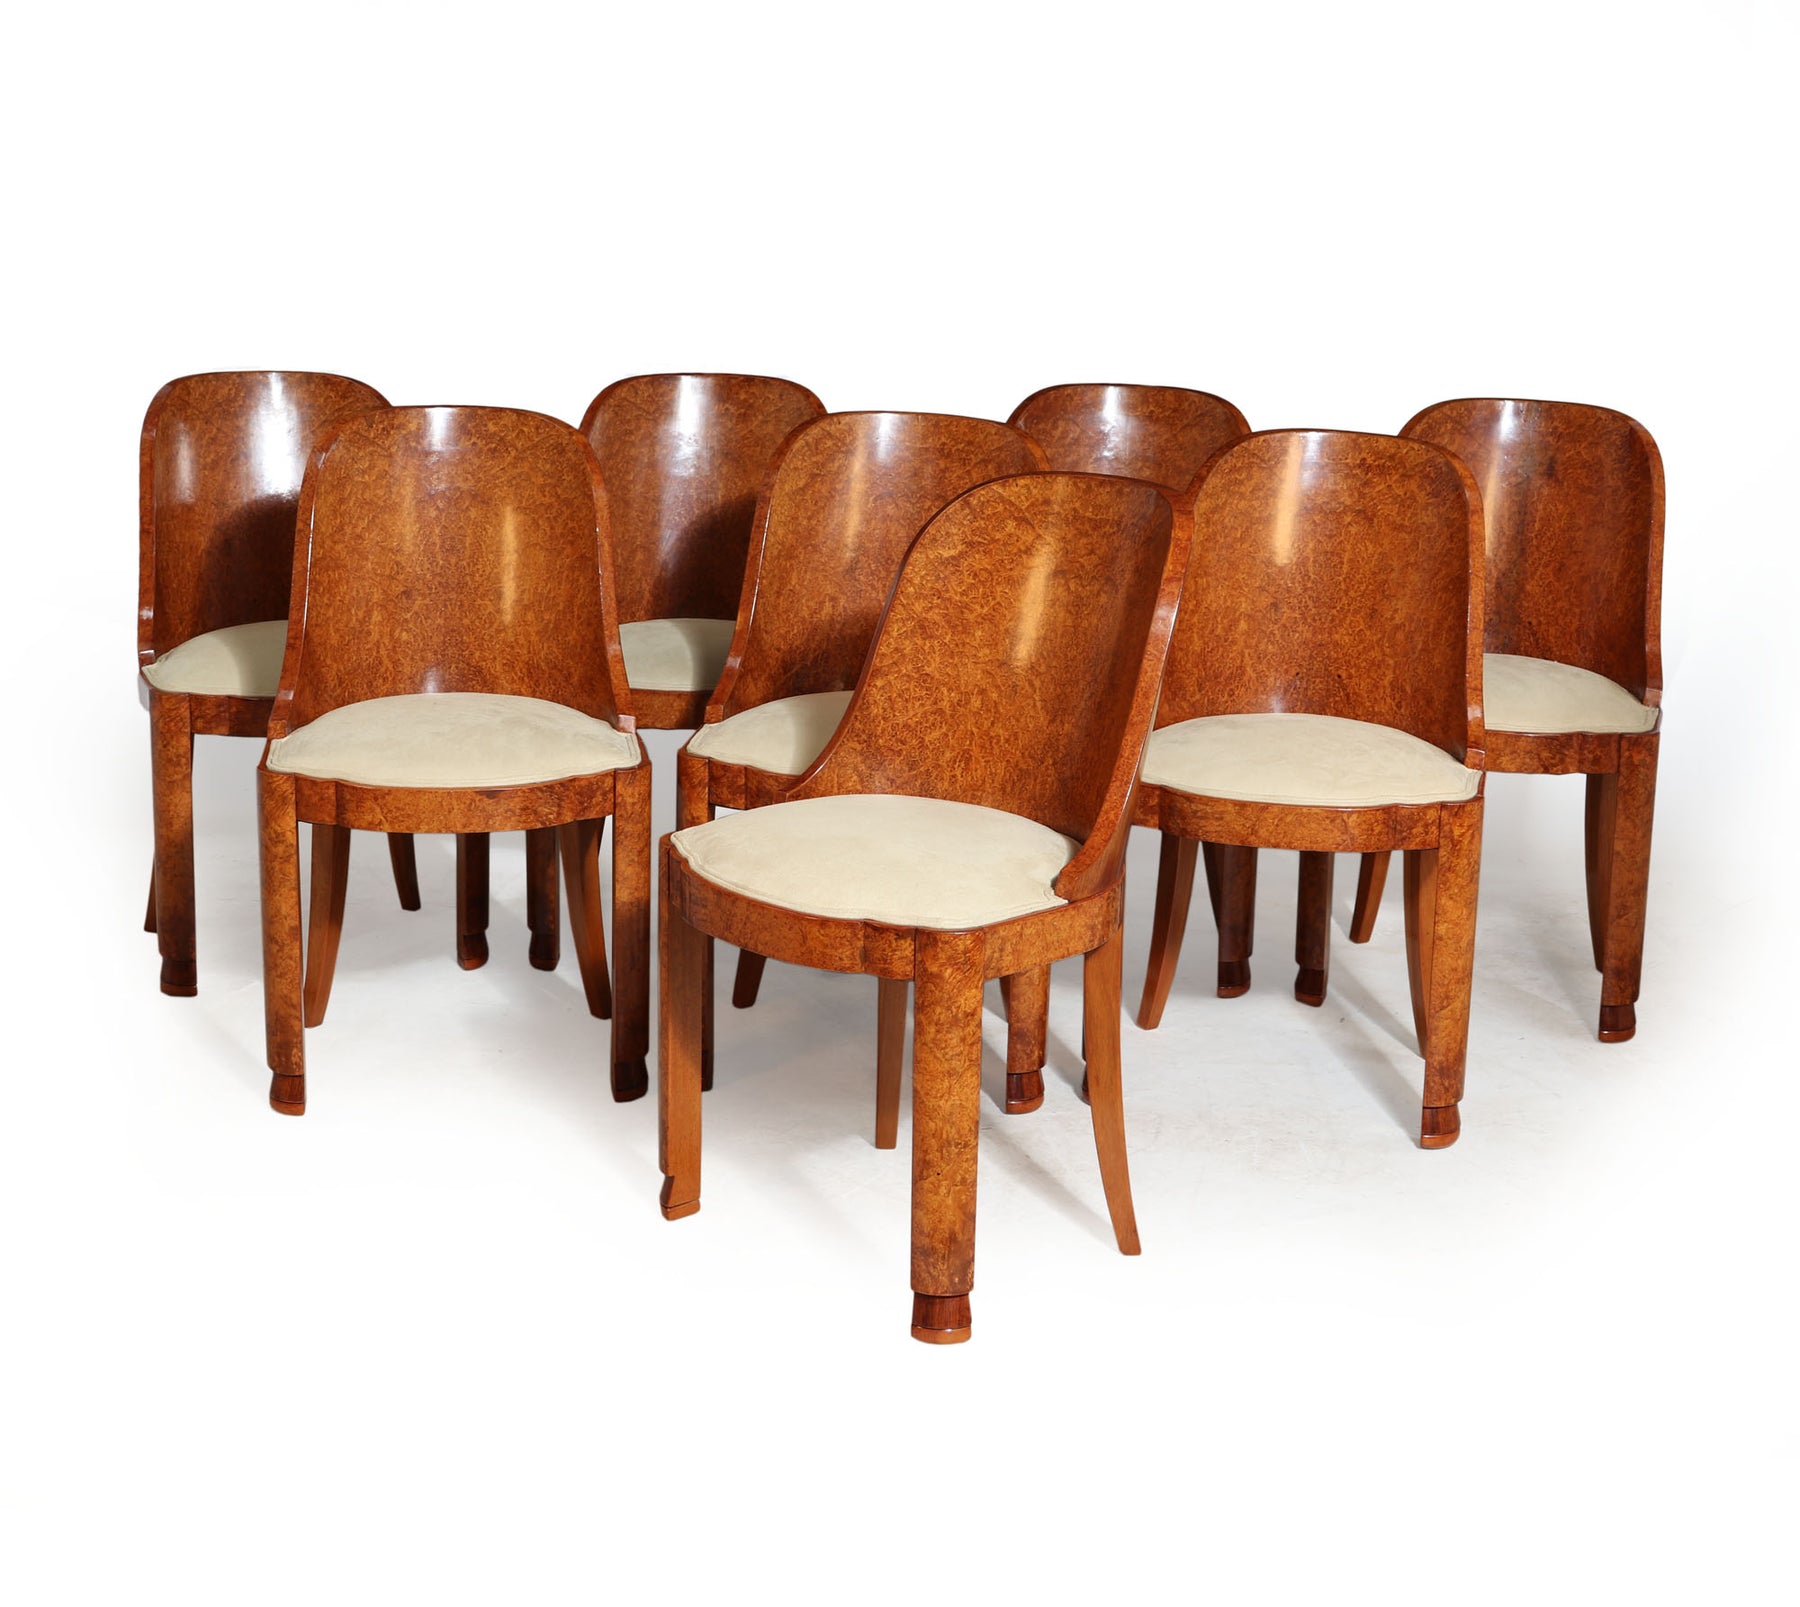 Set Of 8 French Art Deco Dining Chairs In Amboyna – Thefurniturerooms